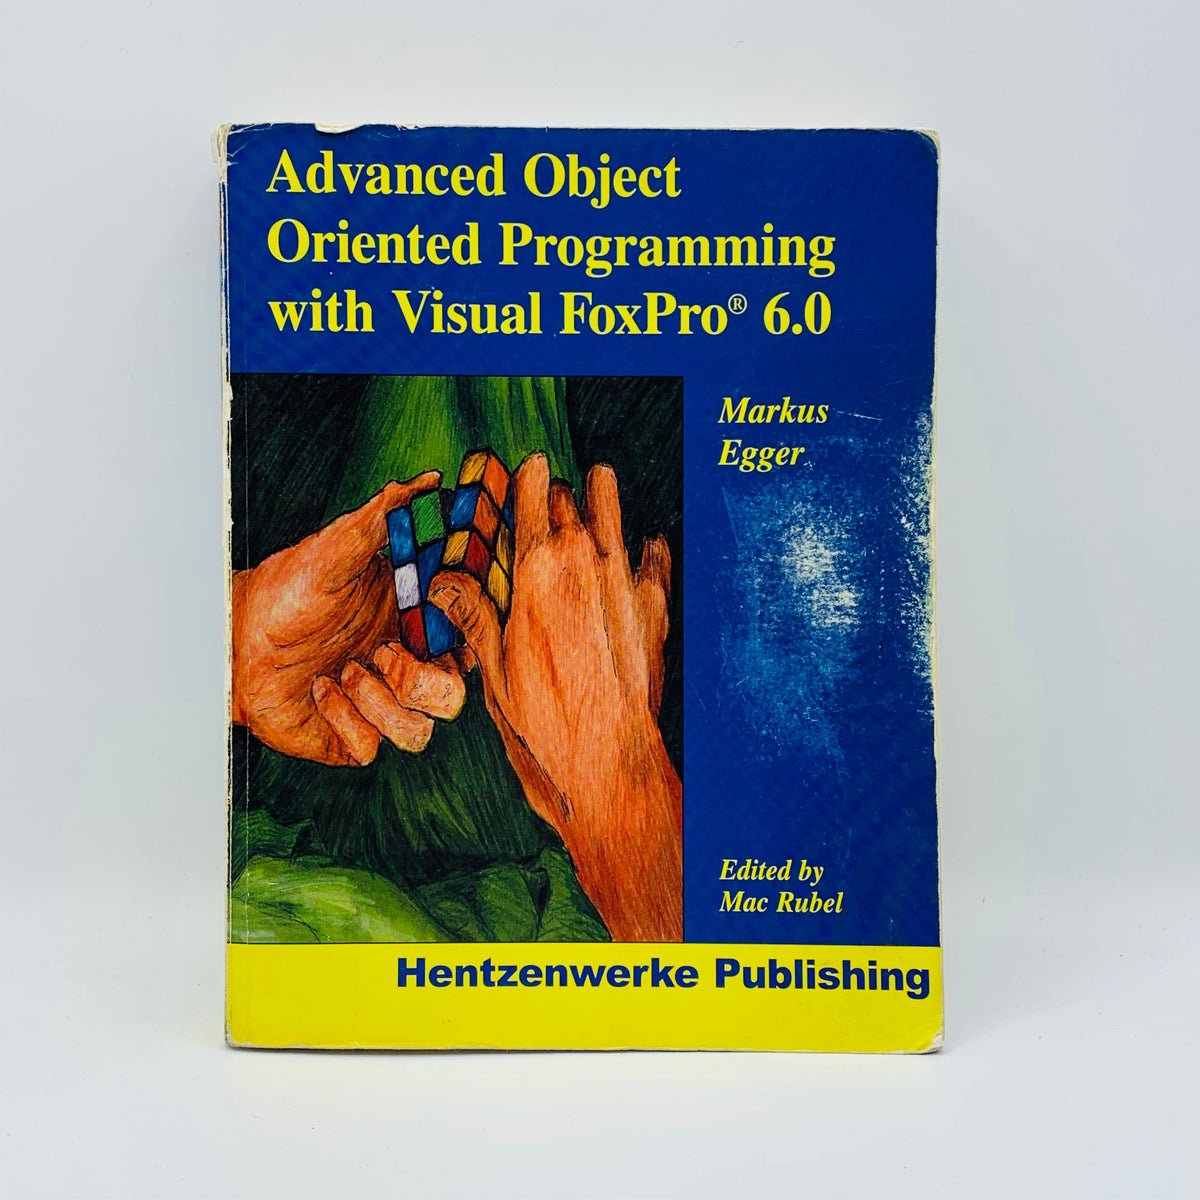 Advanced Object Oriented Programming with Visual FoxPro 6.0 - Stuff Out